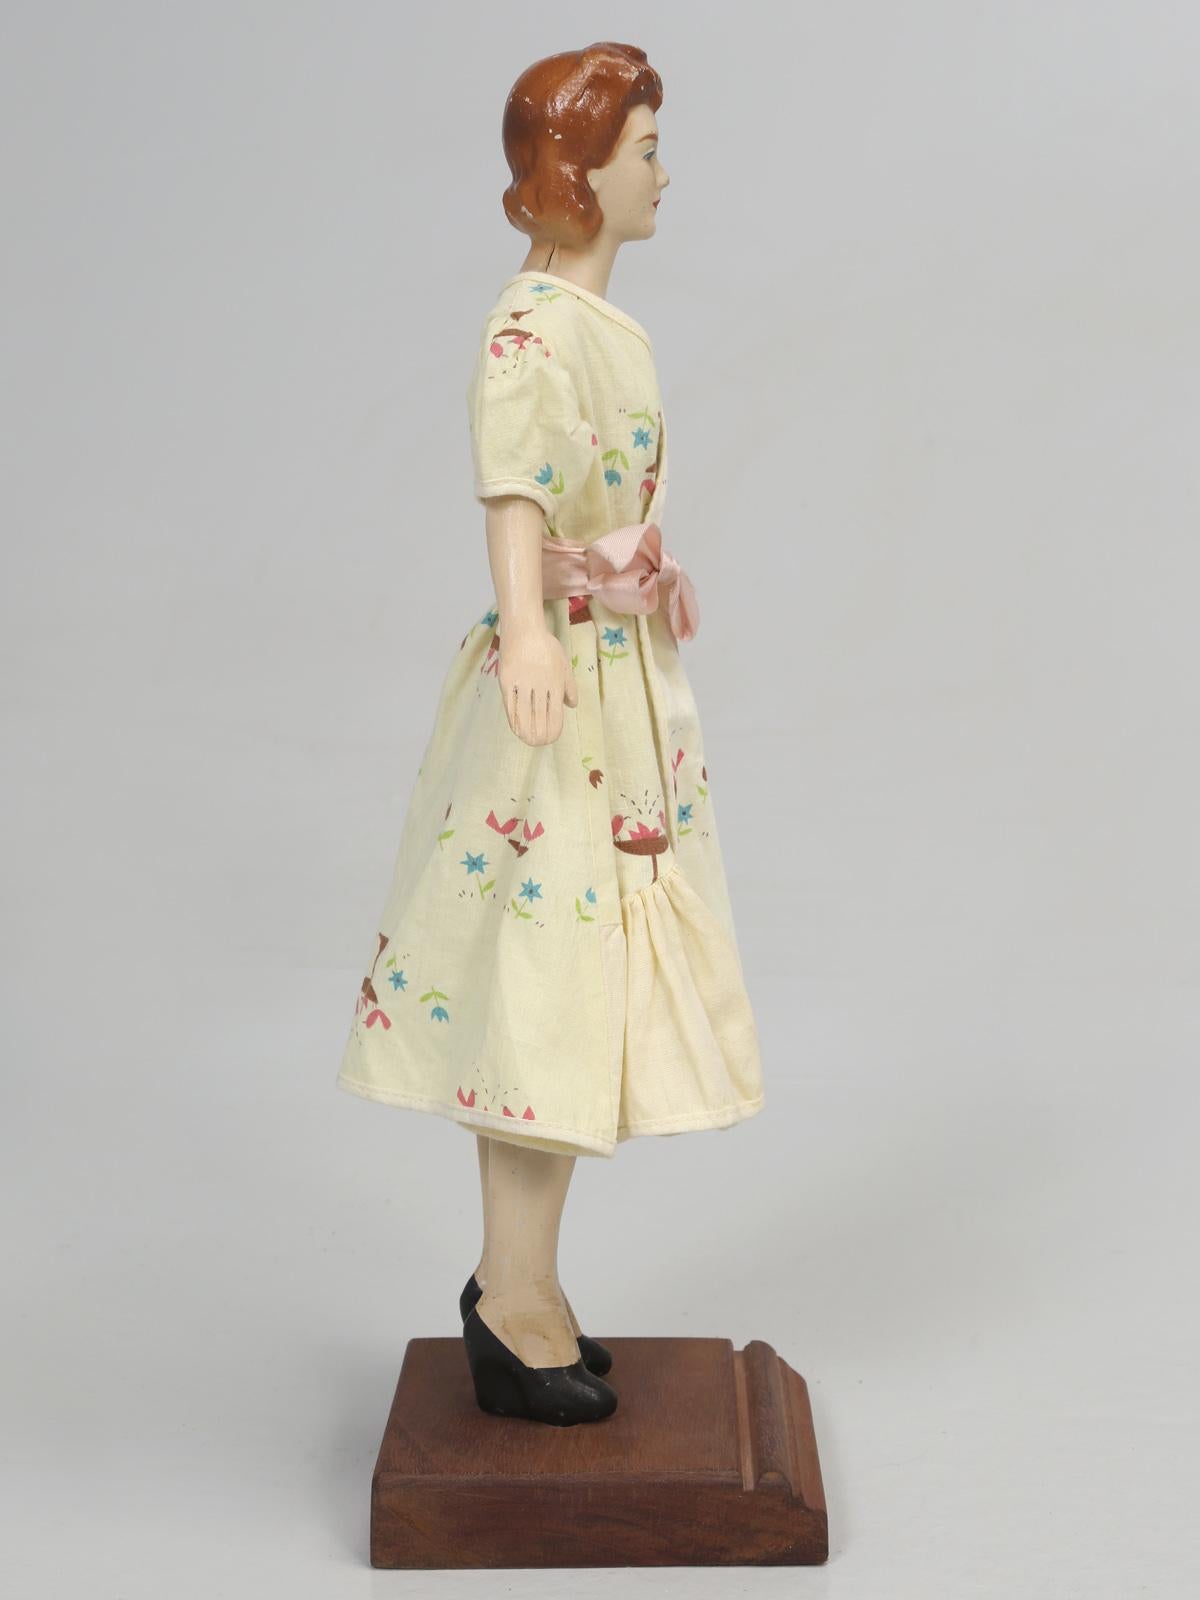 Miniature Department Store Mannequin, Used on a Display Counter 7